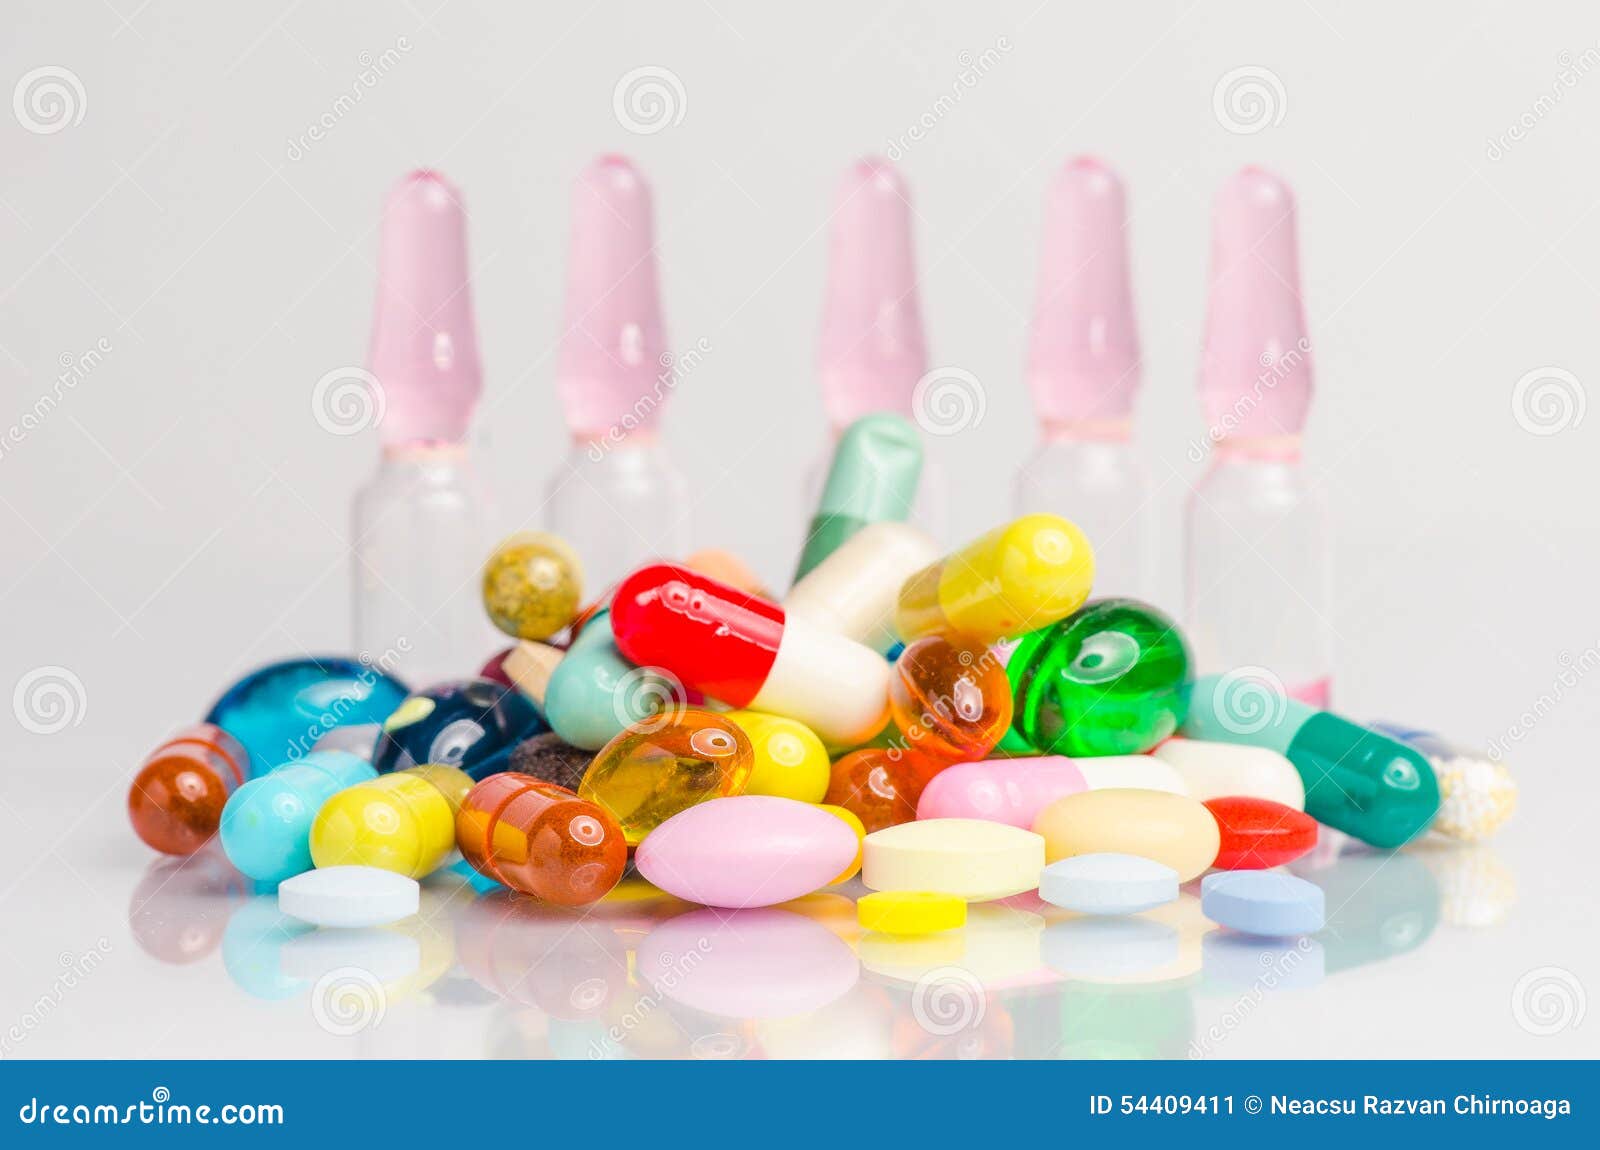 ampoule and pills